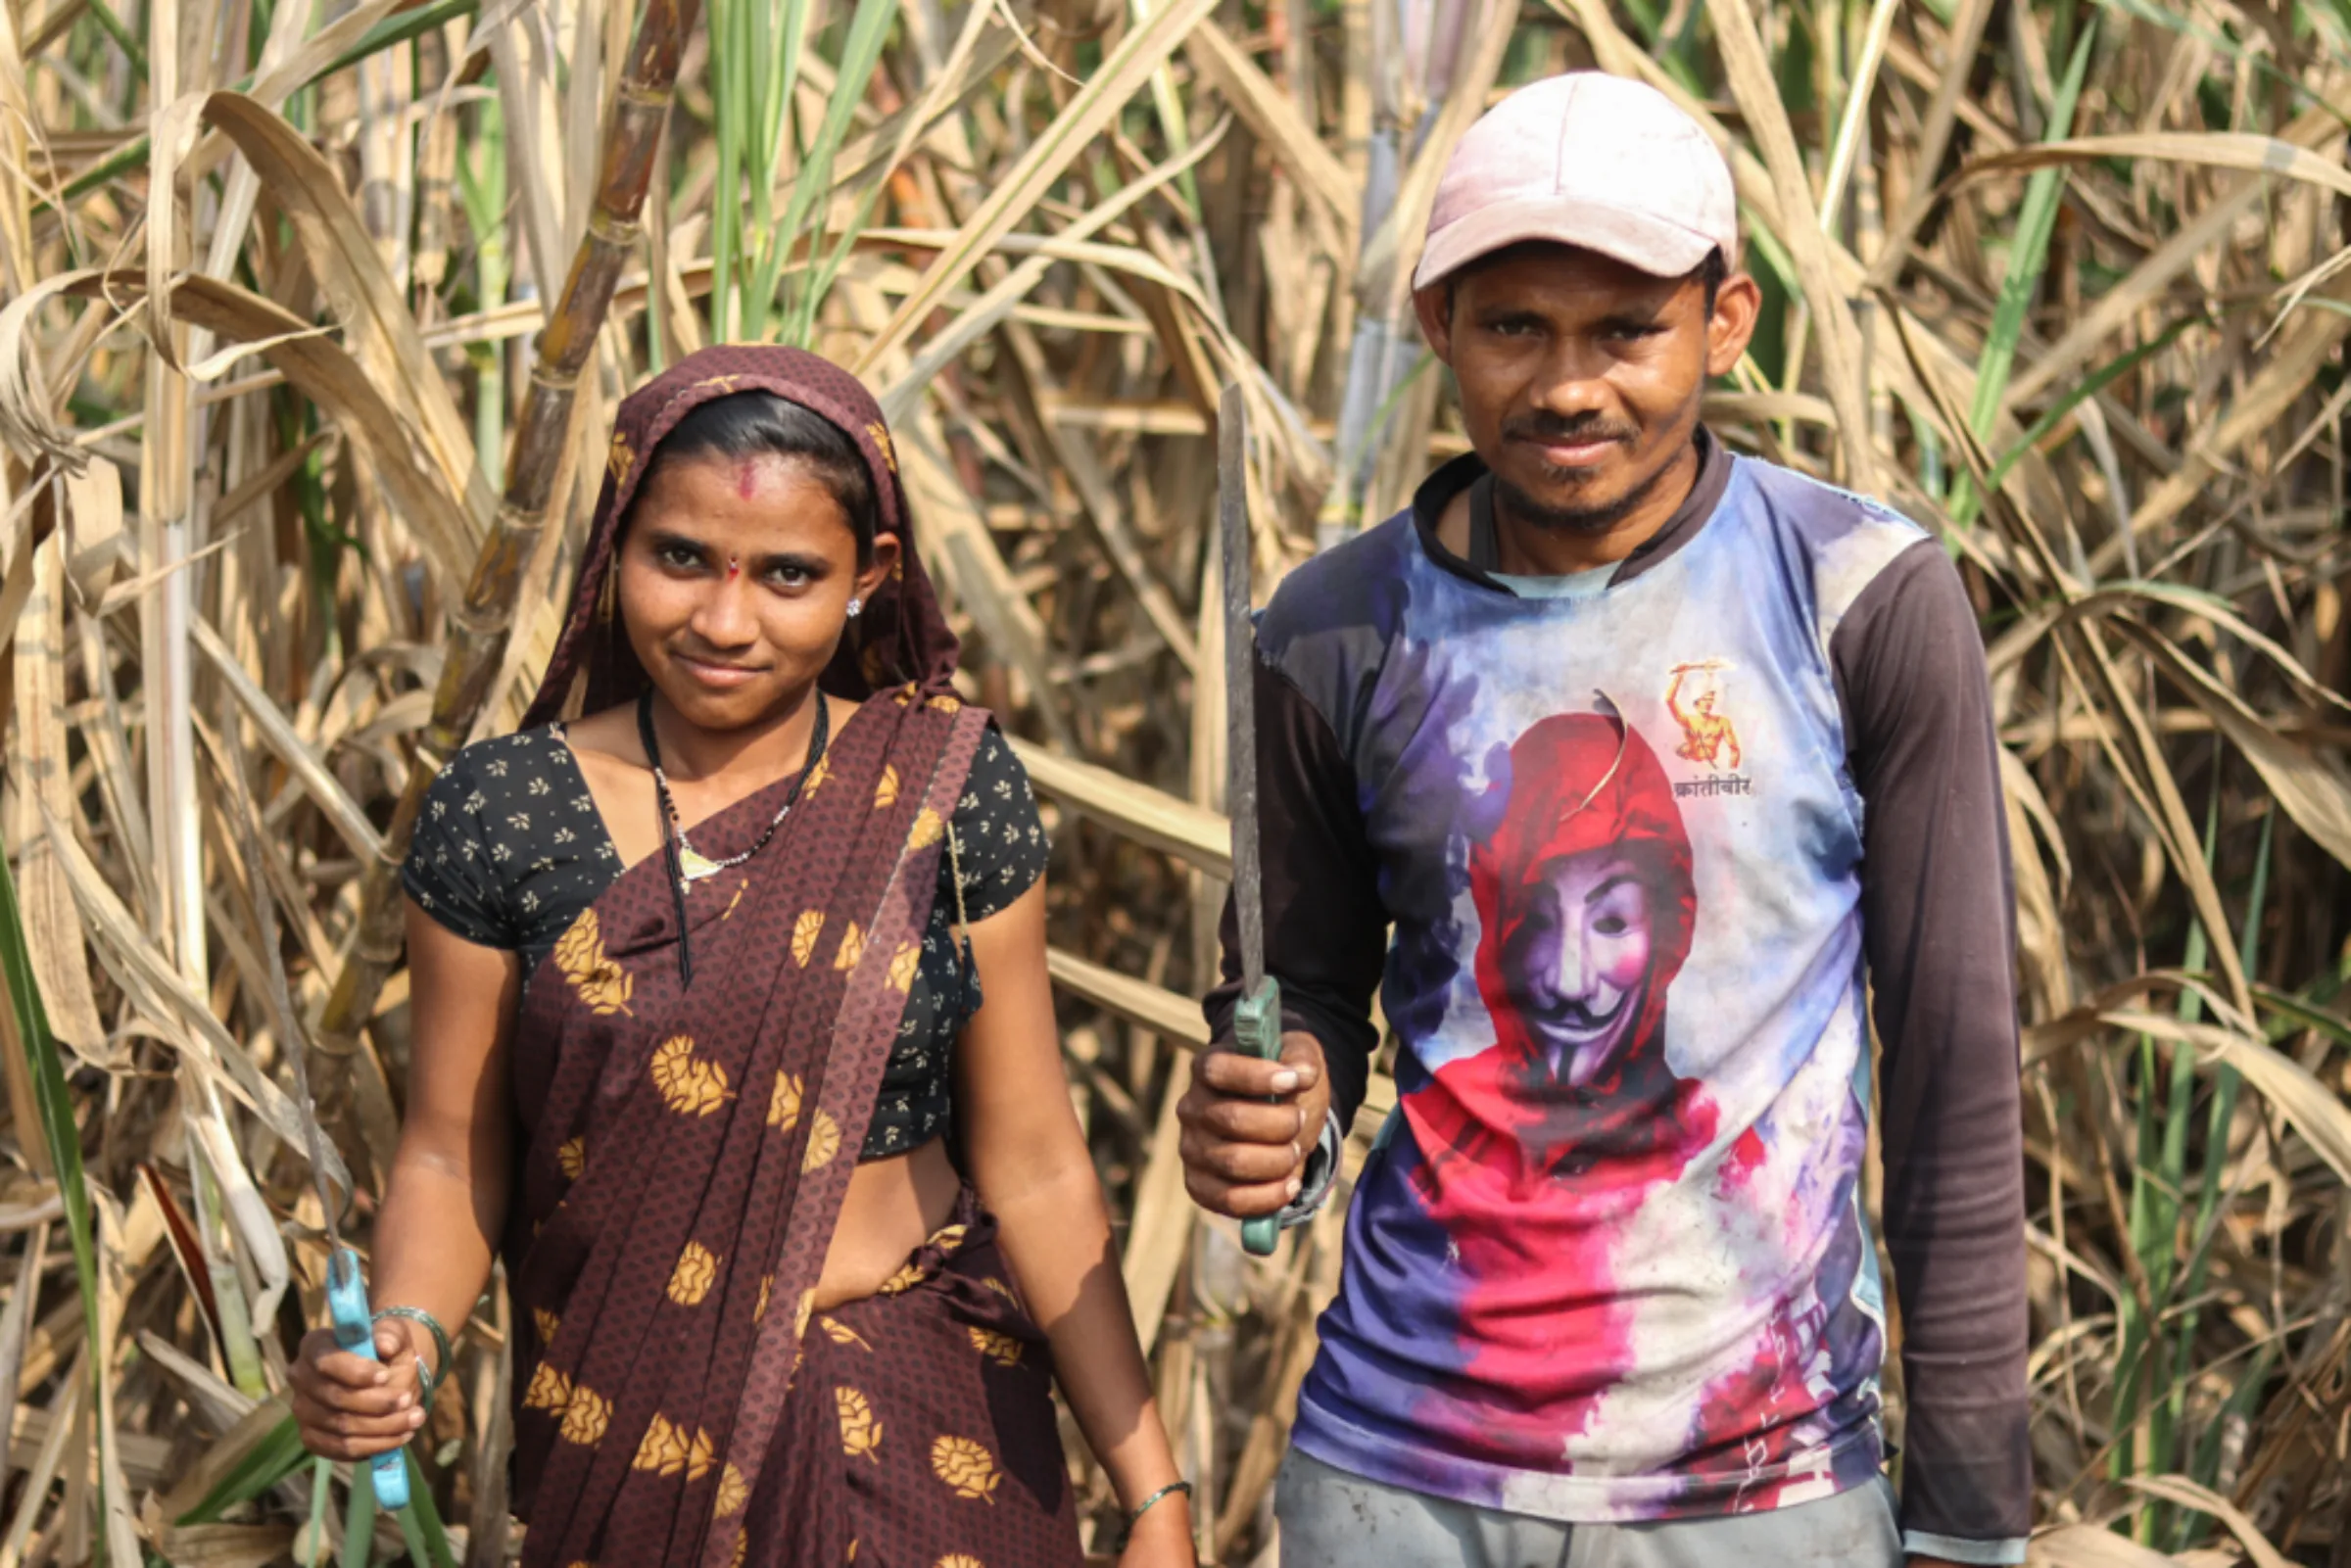 Moni Nave (to the left) and Nitin Nave at a sugarcane farm in Maharashtra’s Khochi village which is over 600 kilometres (372 miles) from their village